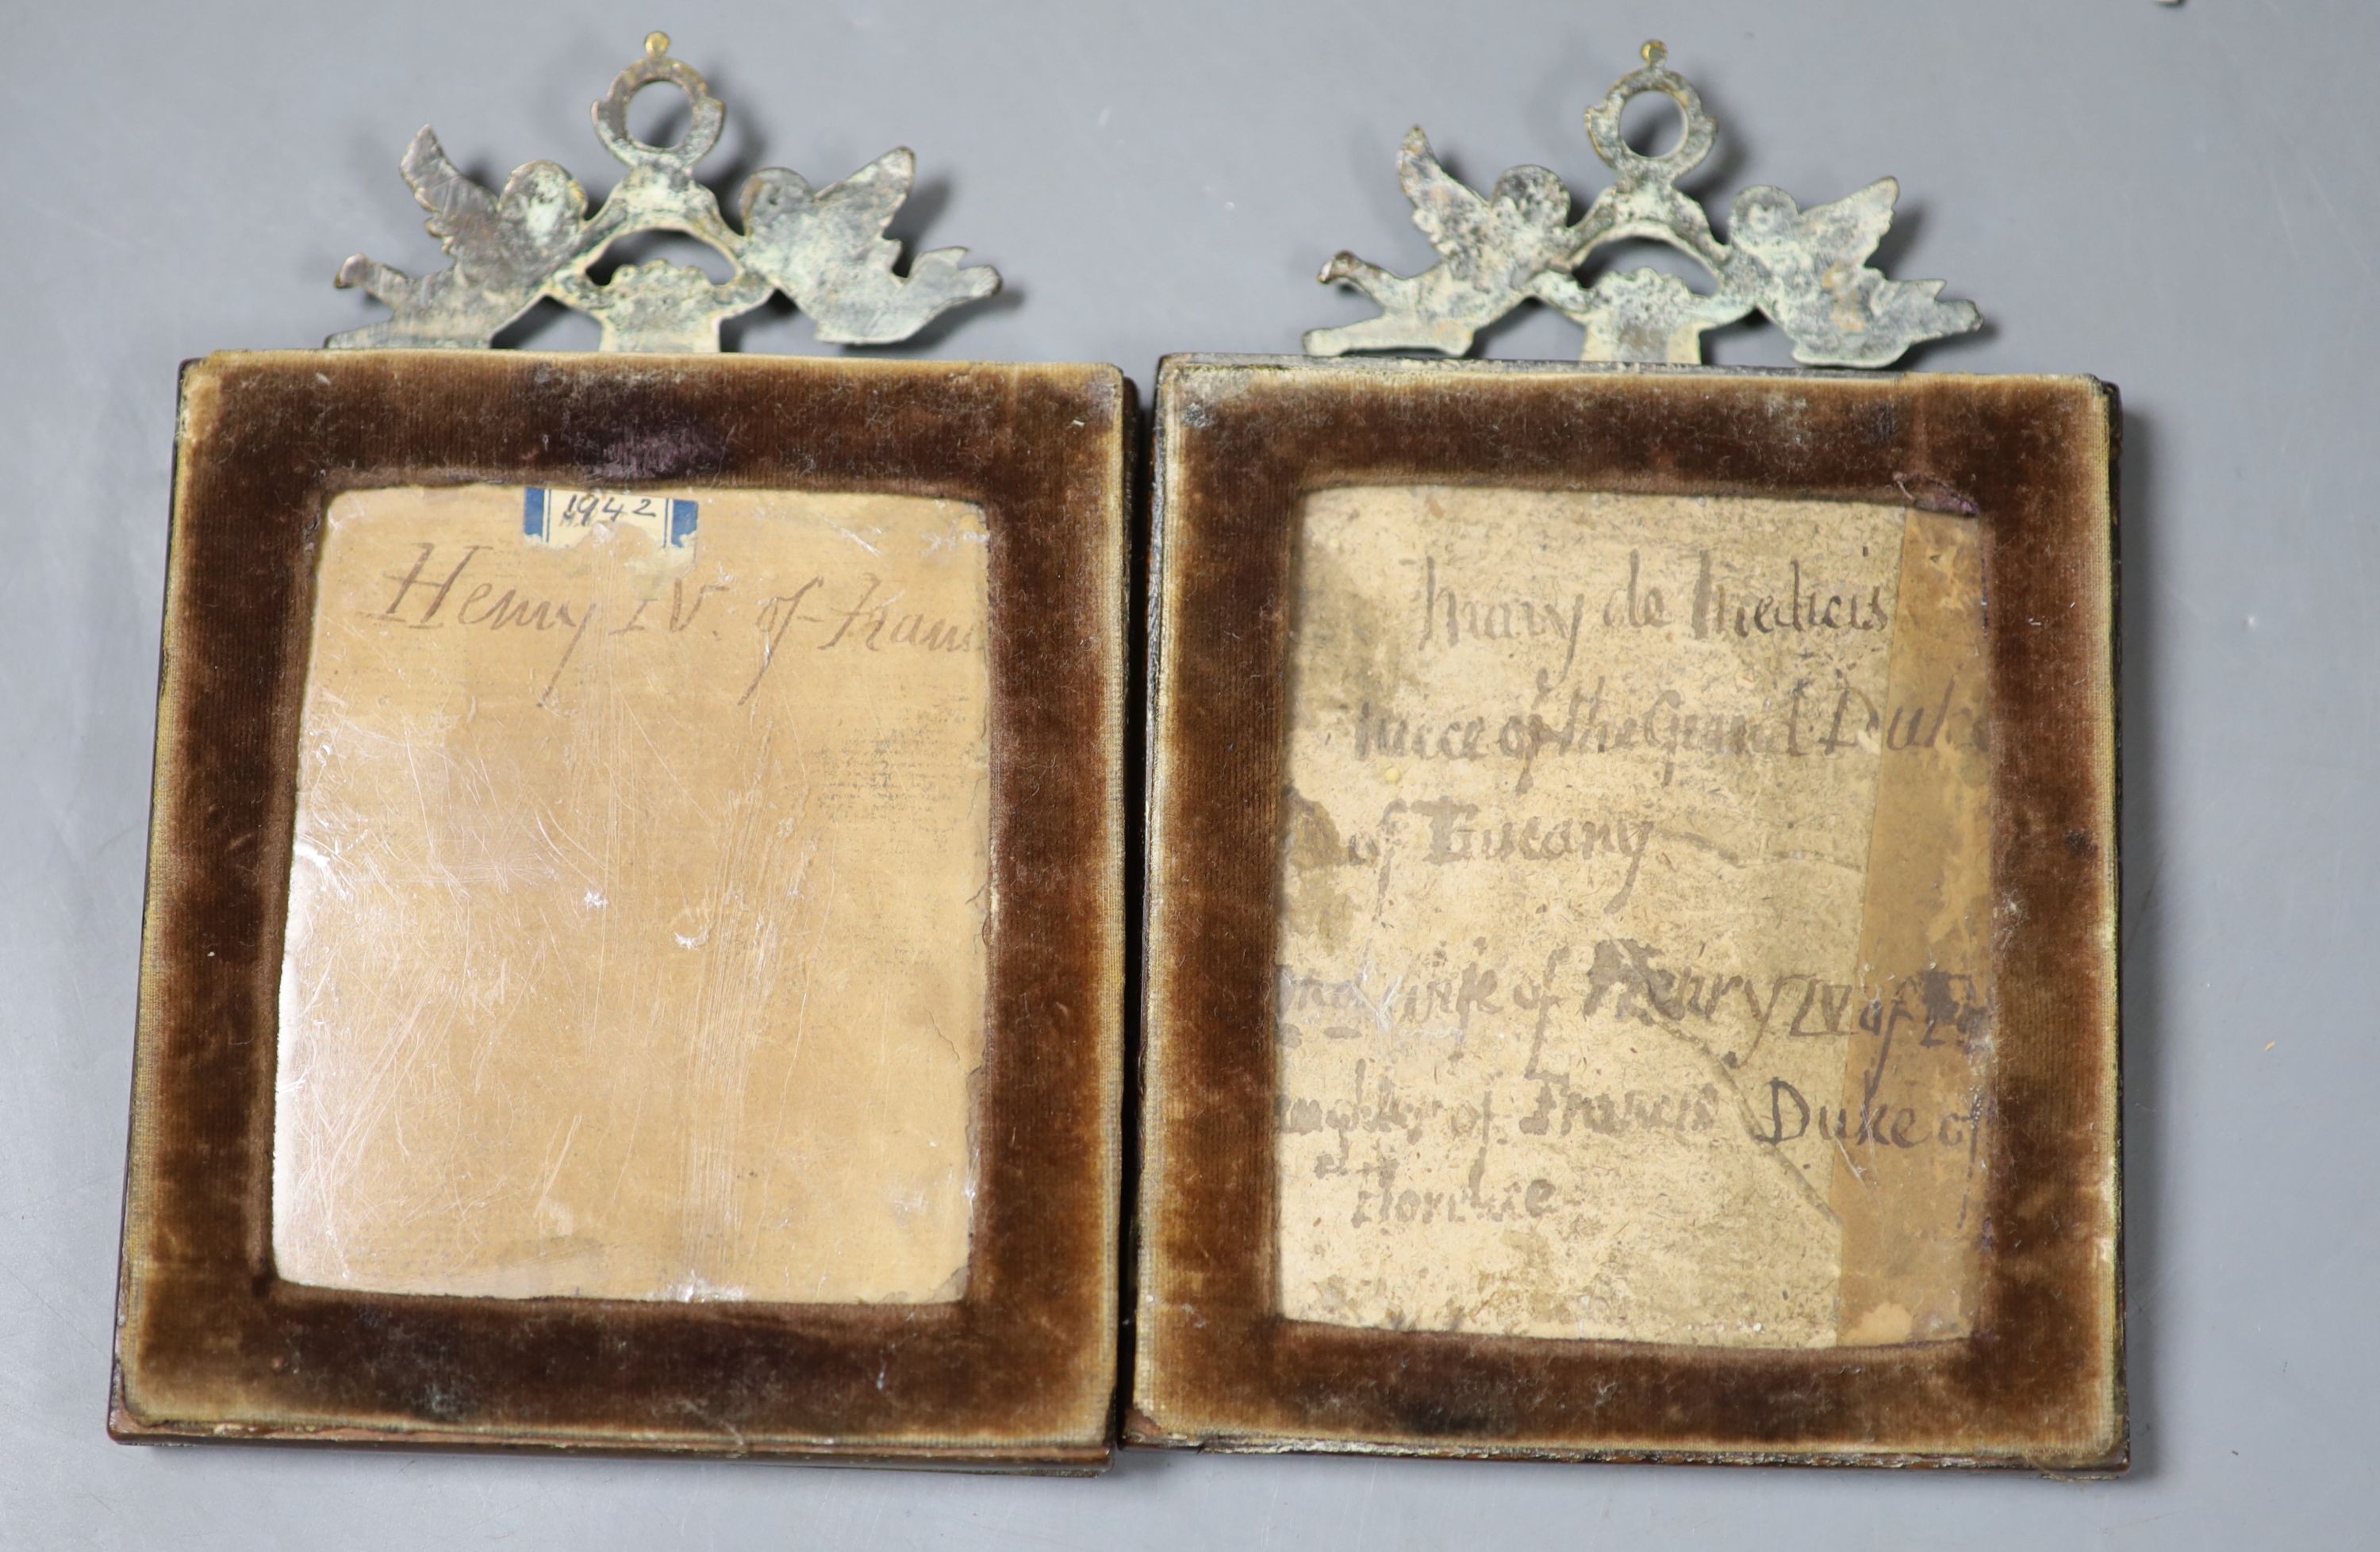 A pair of 19th century brass portrait miniatures on ivory of Henry V of France and Mary De Medici of Tuscany, both 10cm